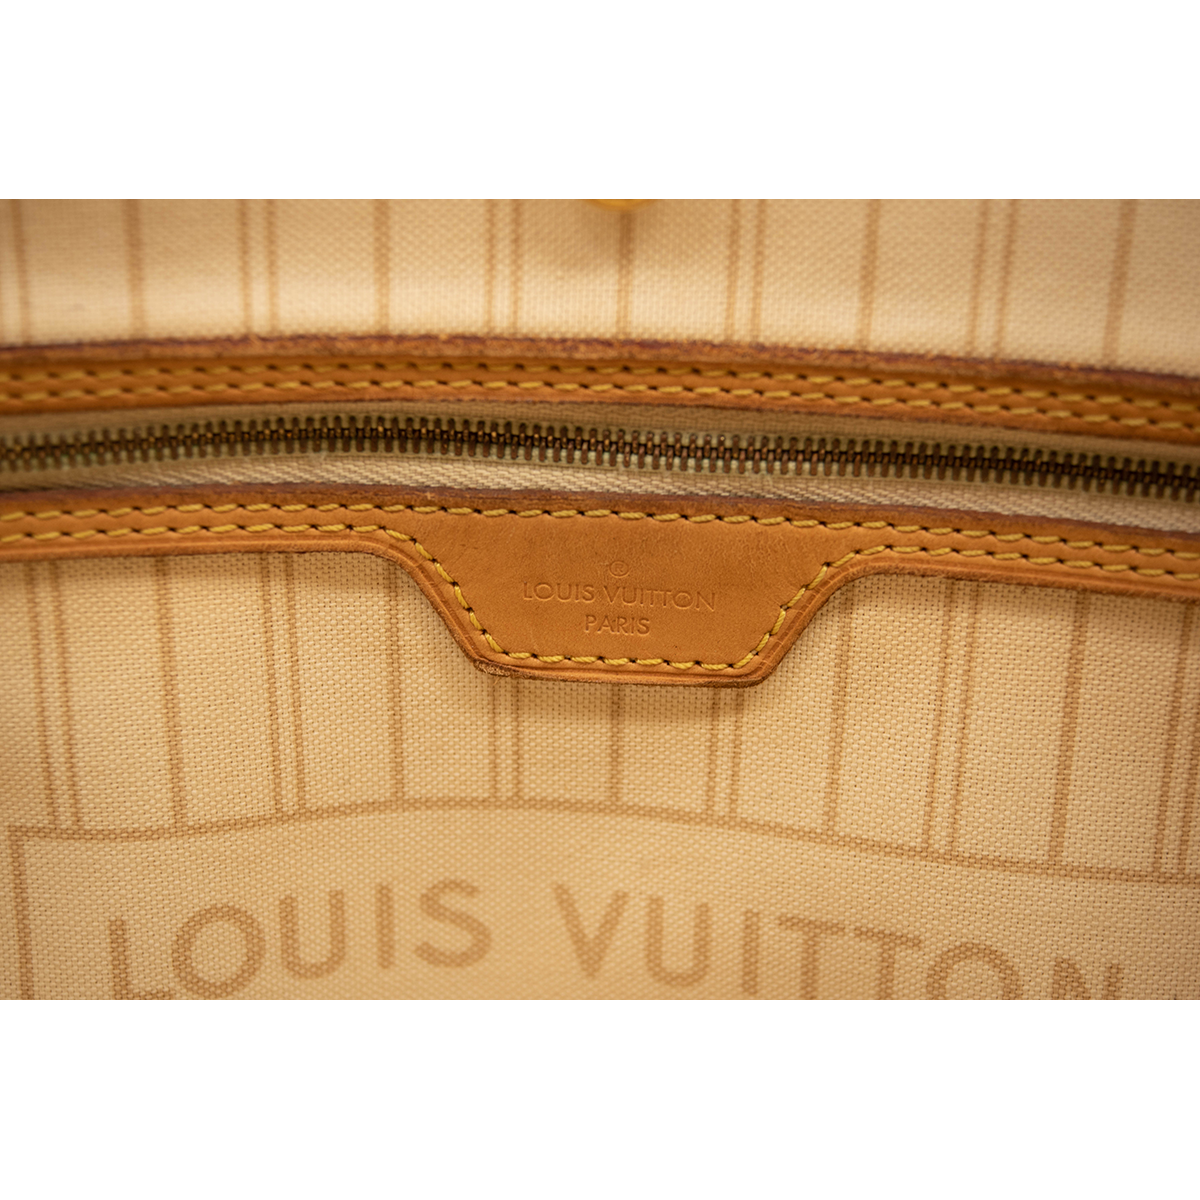 Sold at Auction: Louis Vuitton, LOUIS VUITTON, NEVERFULL DAMIER AZUR CANVAS  MM BAG, CREAM WHITE AND BLUE CHECKERED RUBBERIZED COTTON